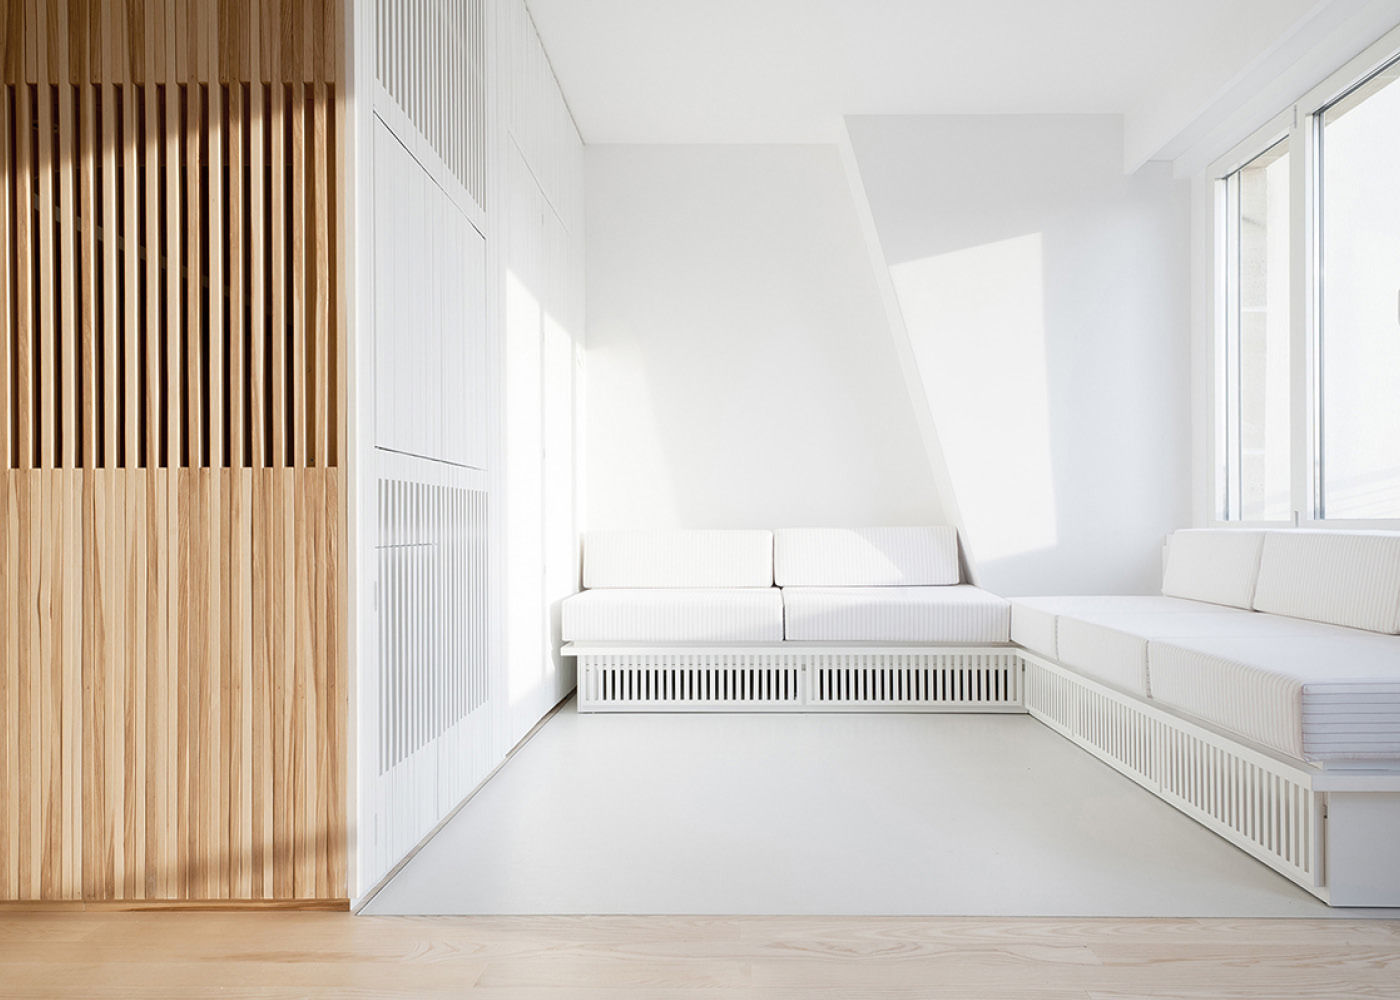 Flat N°4. A small ap, Julien Joly Architecture Julien Joly Architecture Ruang Keluarga Minimalis